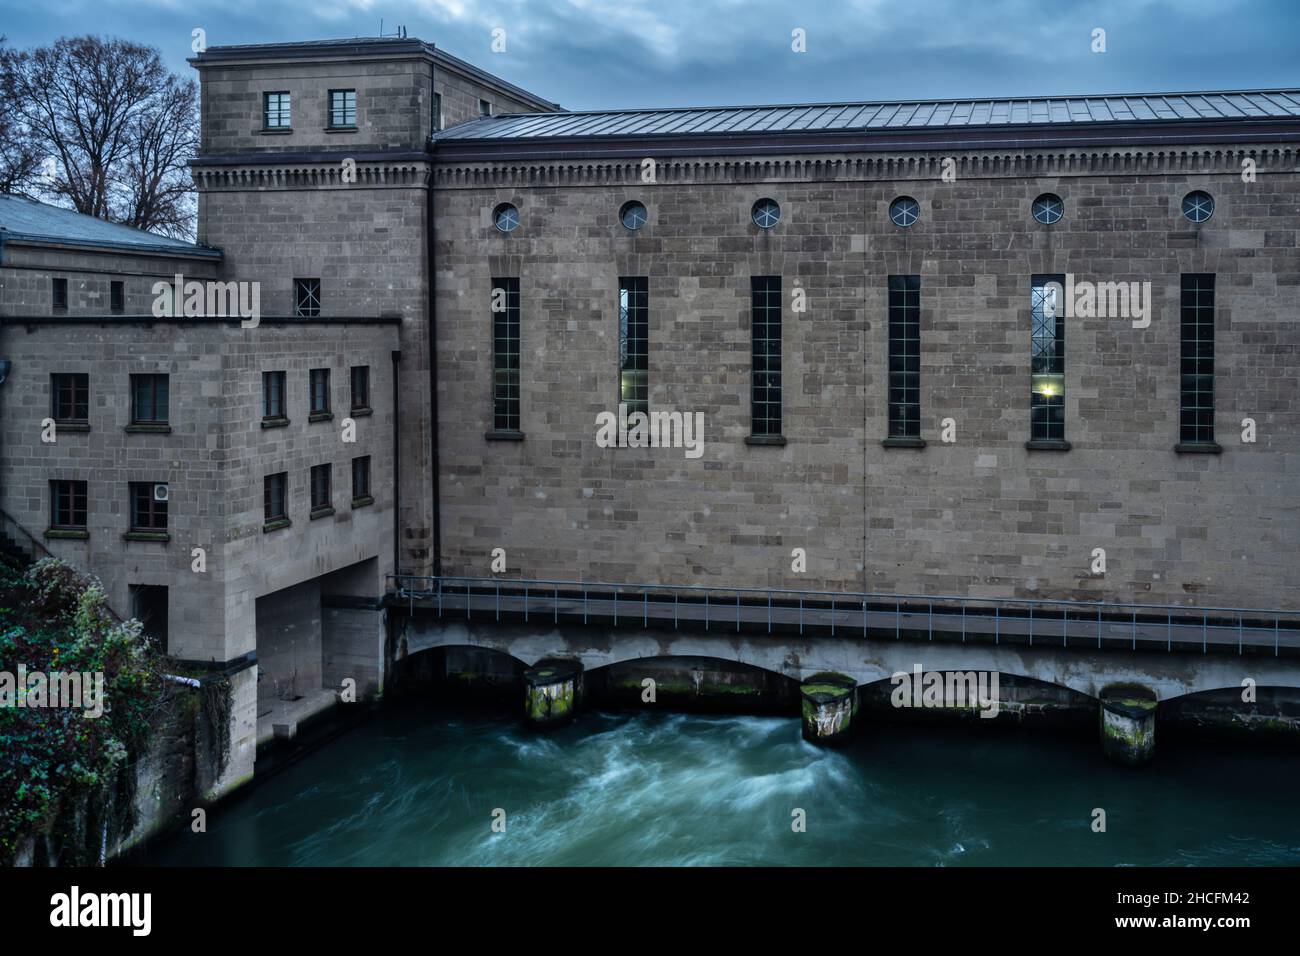 Raffelberg hydroelectric power station in Mülheim an der Ruhr, Speldorf, Germany. One  of the water gates is open and the green water is floating. Stock Photo